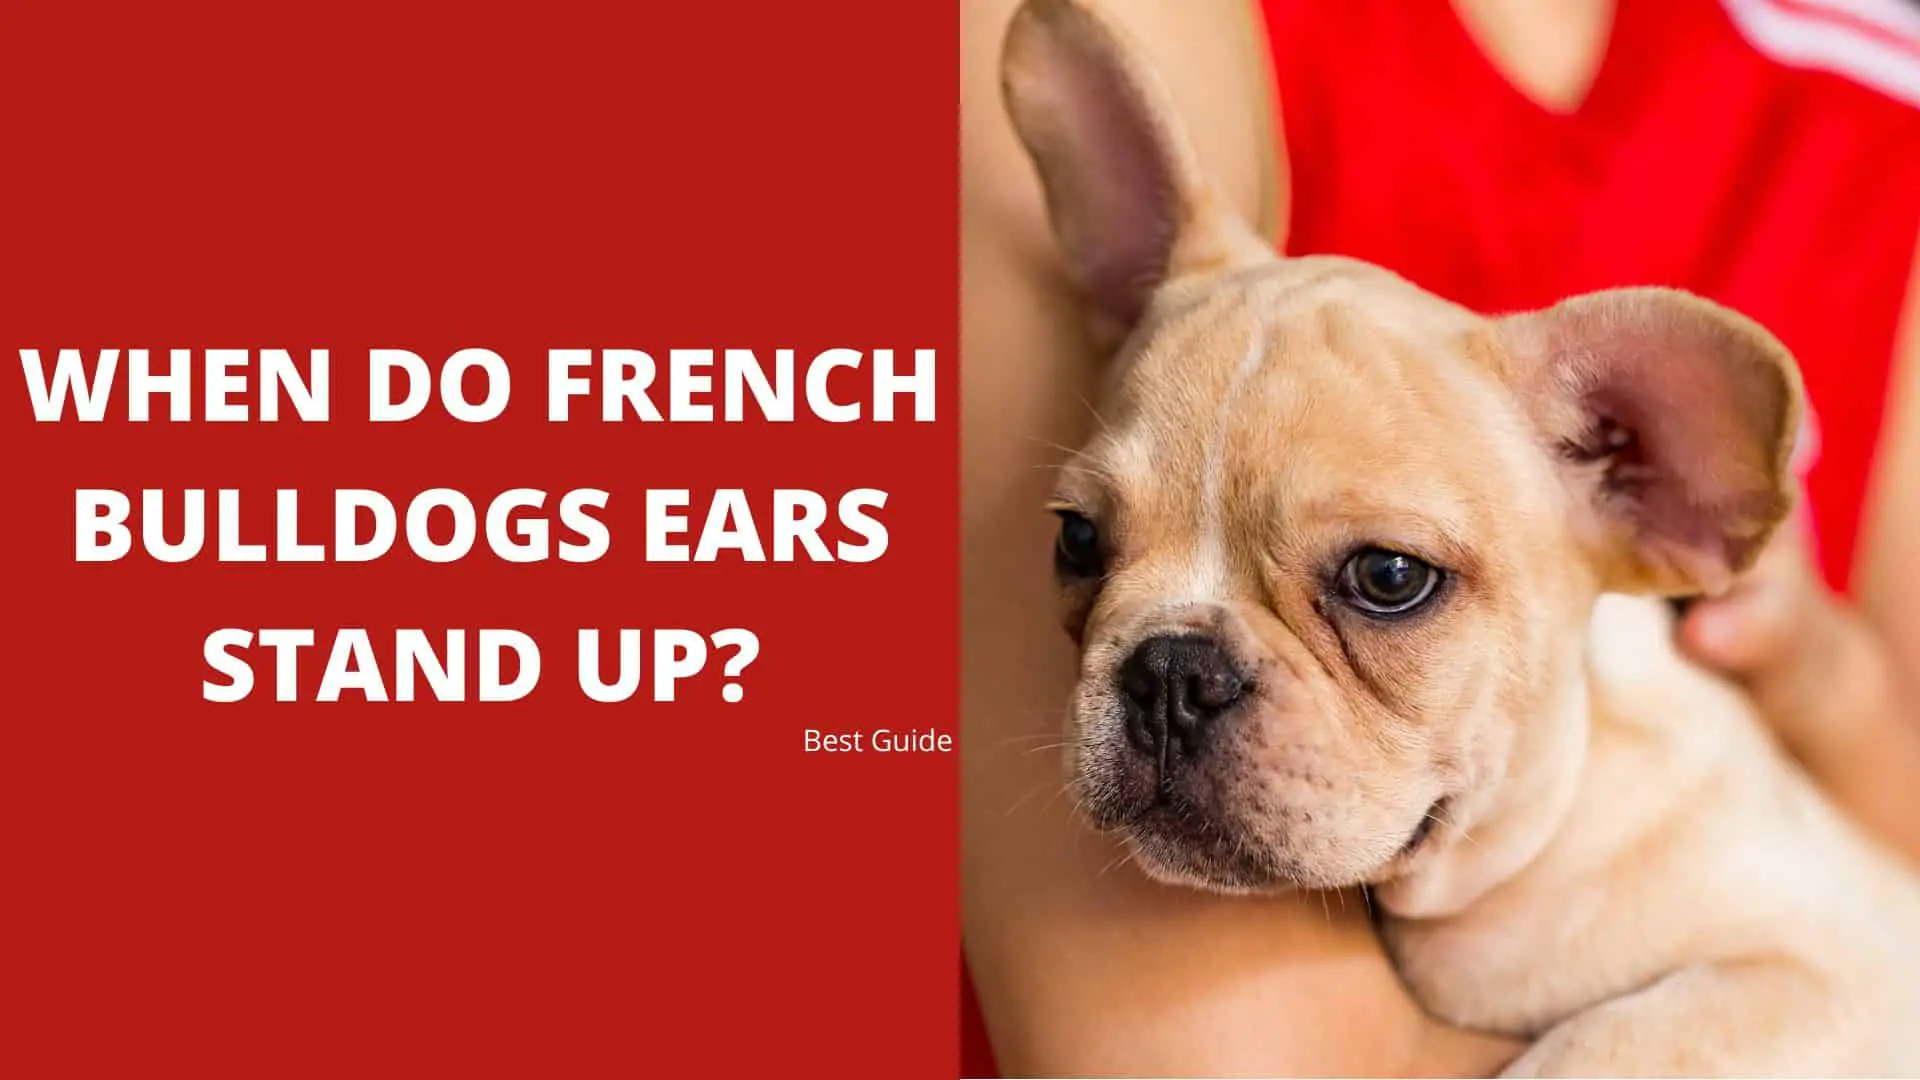 When Do French Bulldogs Ears Stand Up? Best Guide 2022